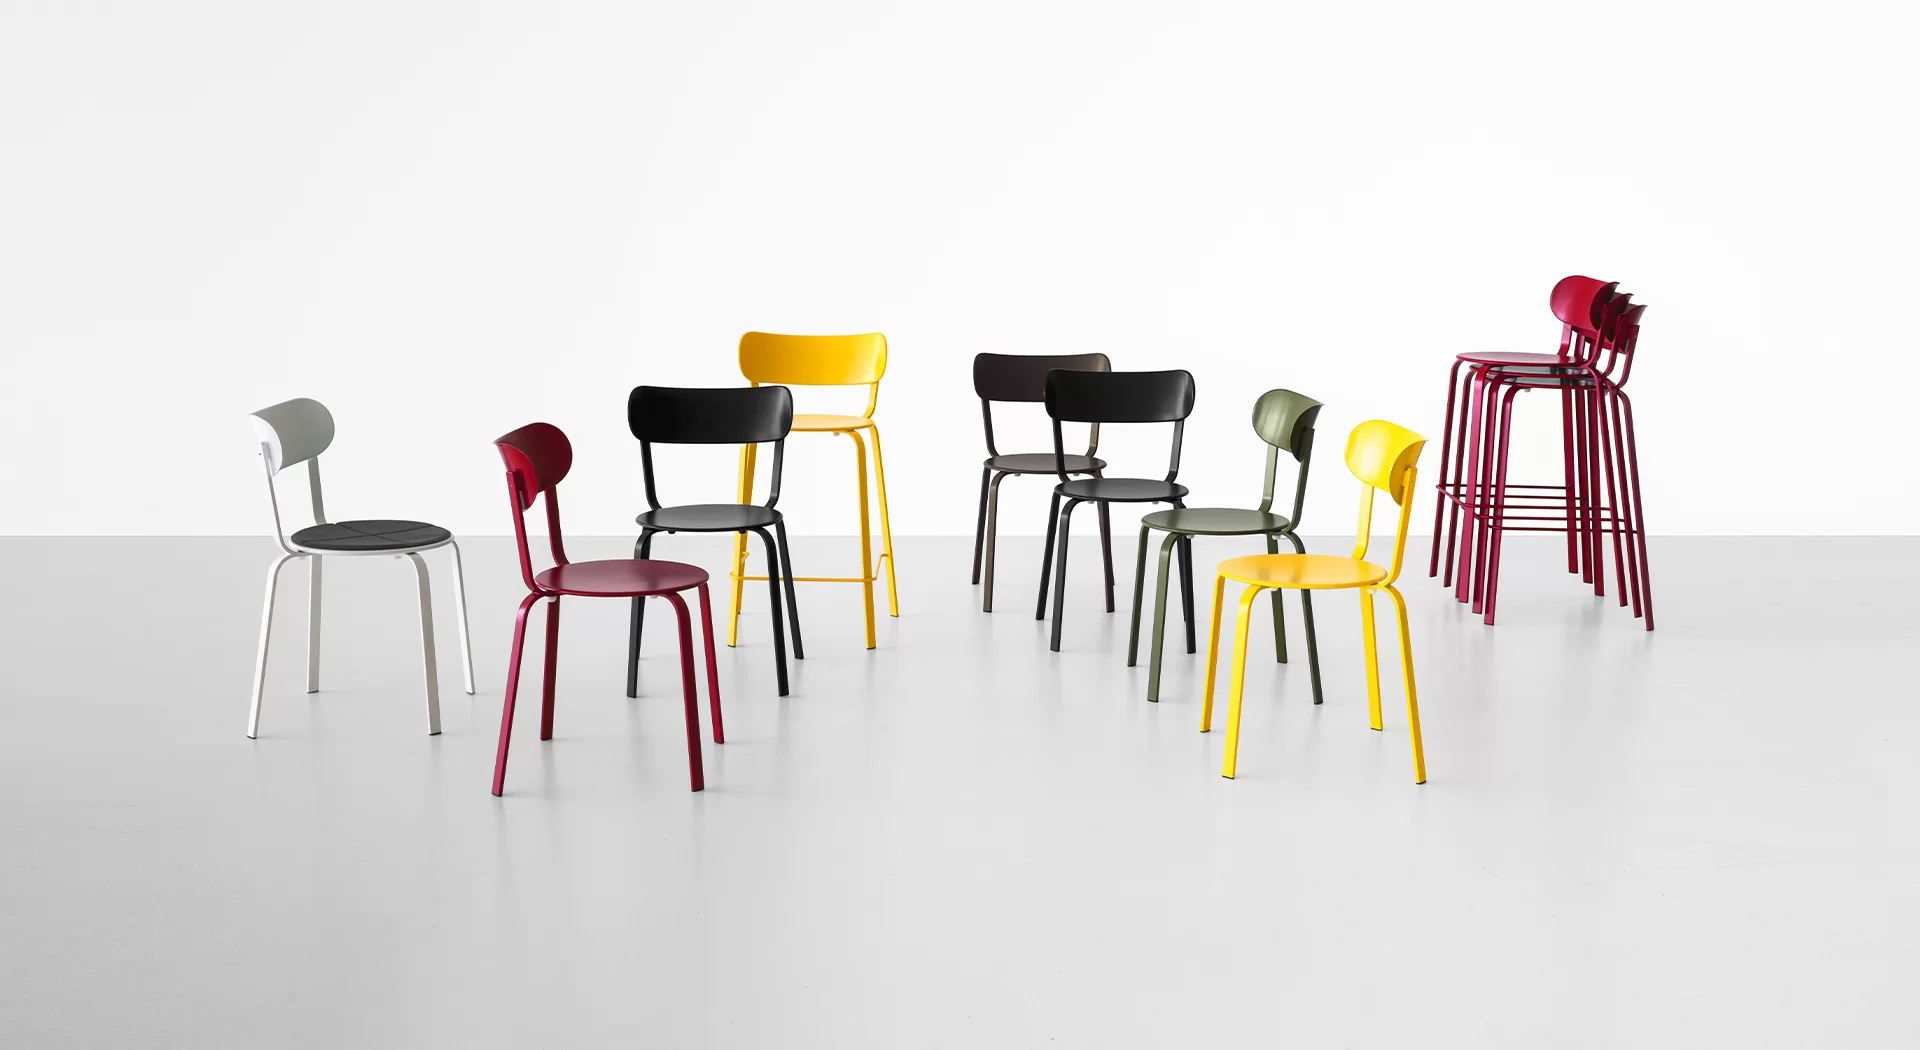 la palma stil metal stacking chairs by patrick norguet - image shows the stil chair in different colors